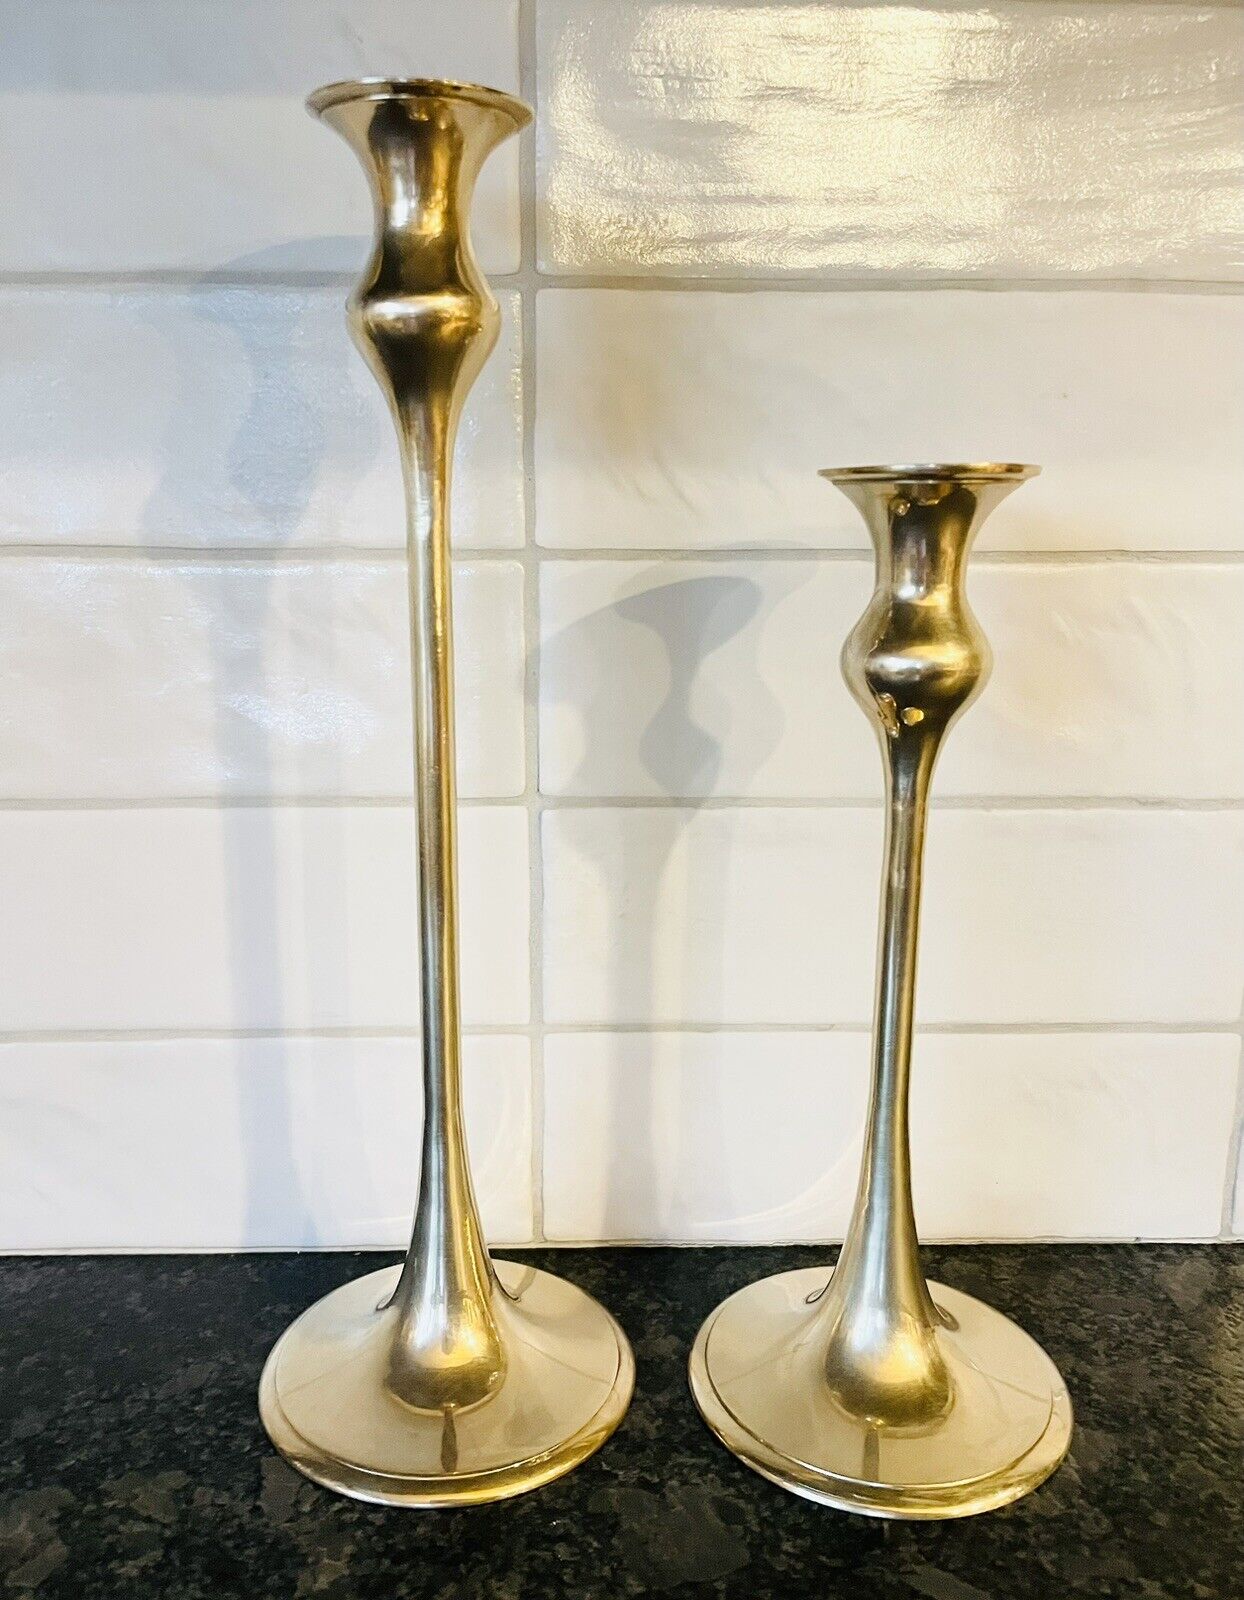 Vintage Pair of 12’’, 9’’ Brass Candlesticks Holders Made in India